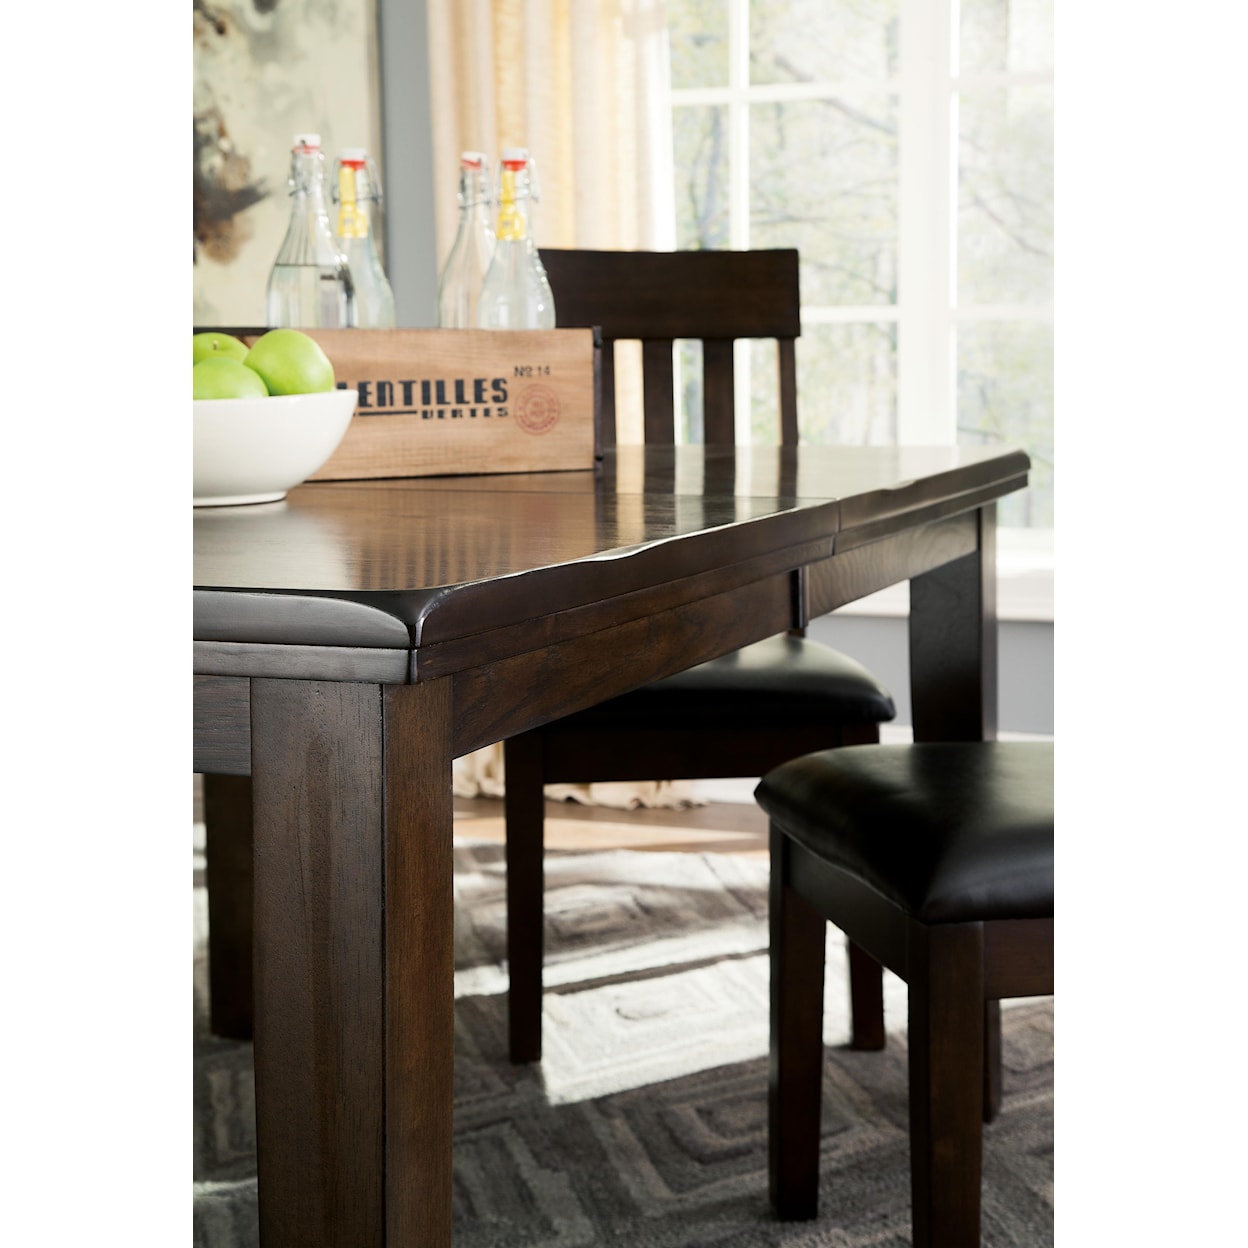 Signature Design by Ashley Haddigan Extending Dining Room Table